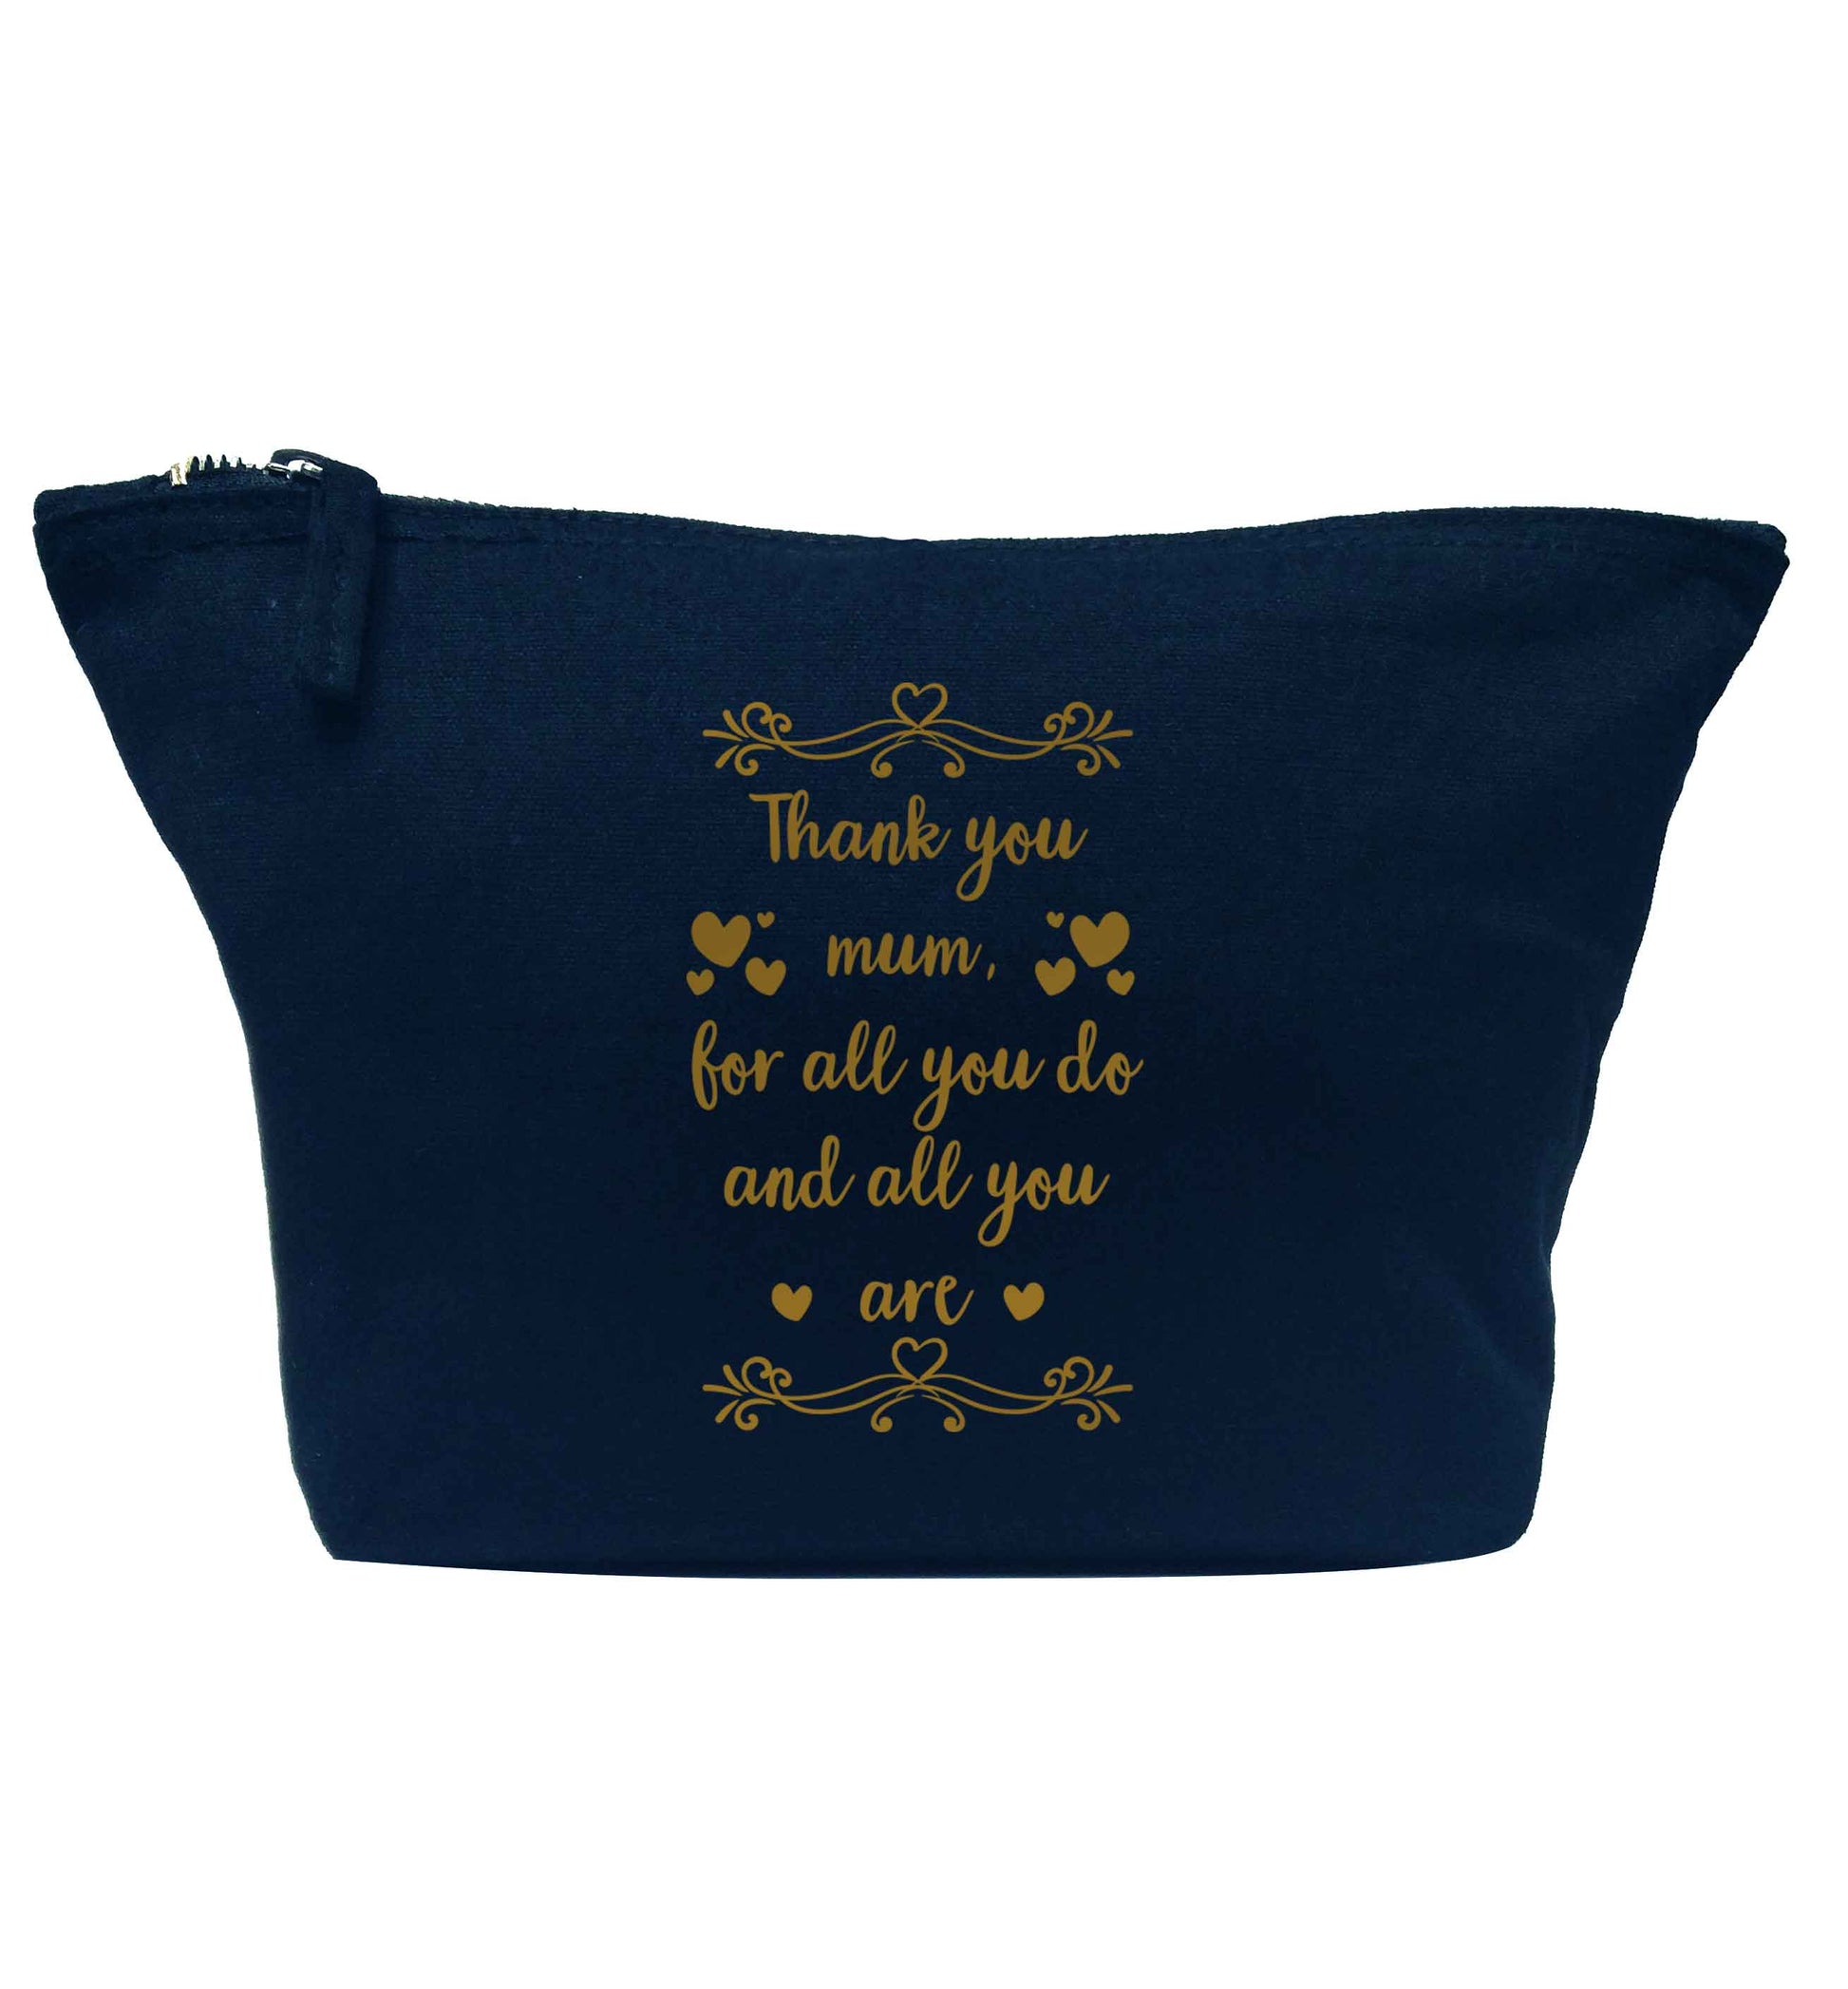 Gorgeous gifts for mums on mother's day! Thank you mum for all you do and all you are navy makeup bag